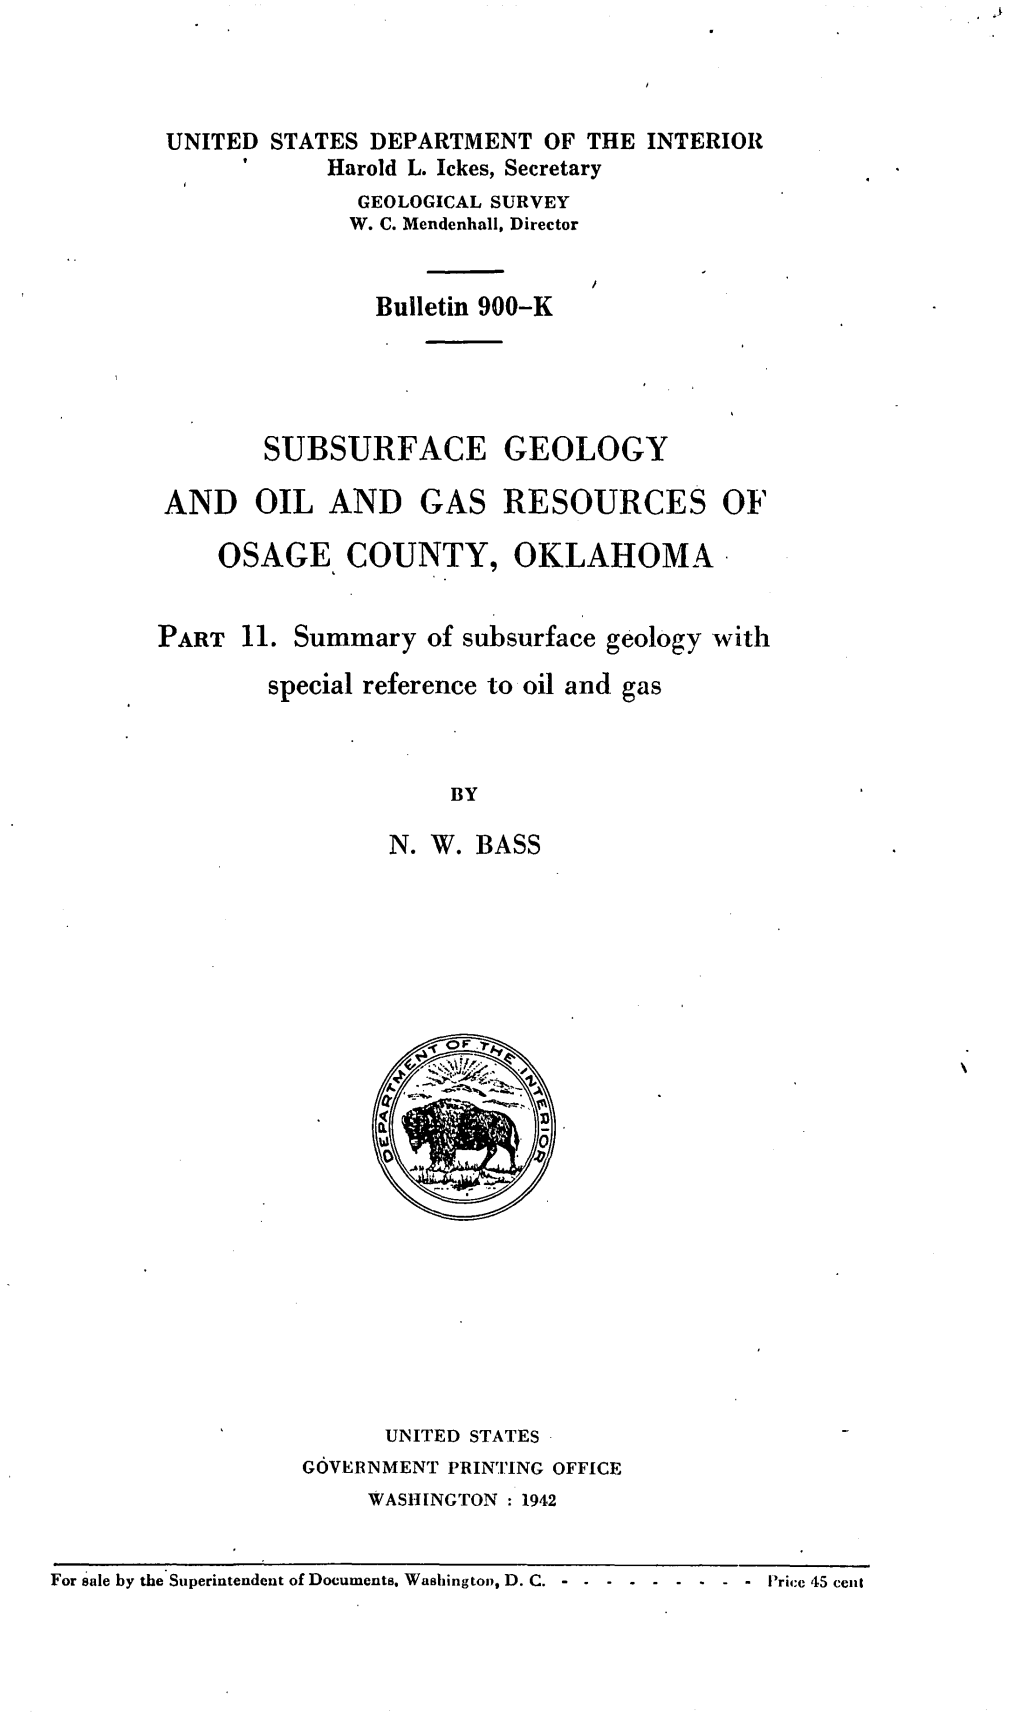 Subsurface Geology and Oil and Gas Resources of Osage County, Oklahoma